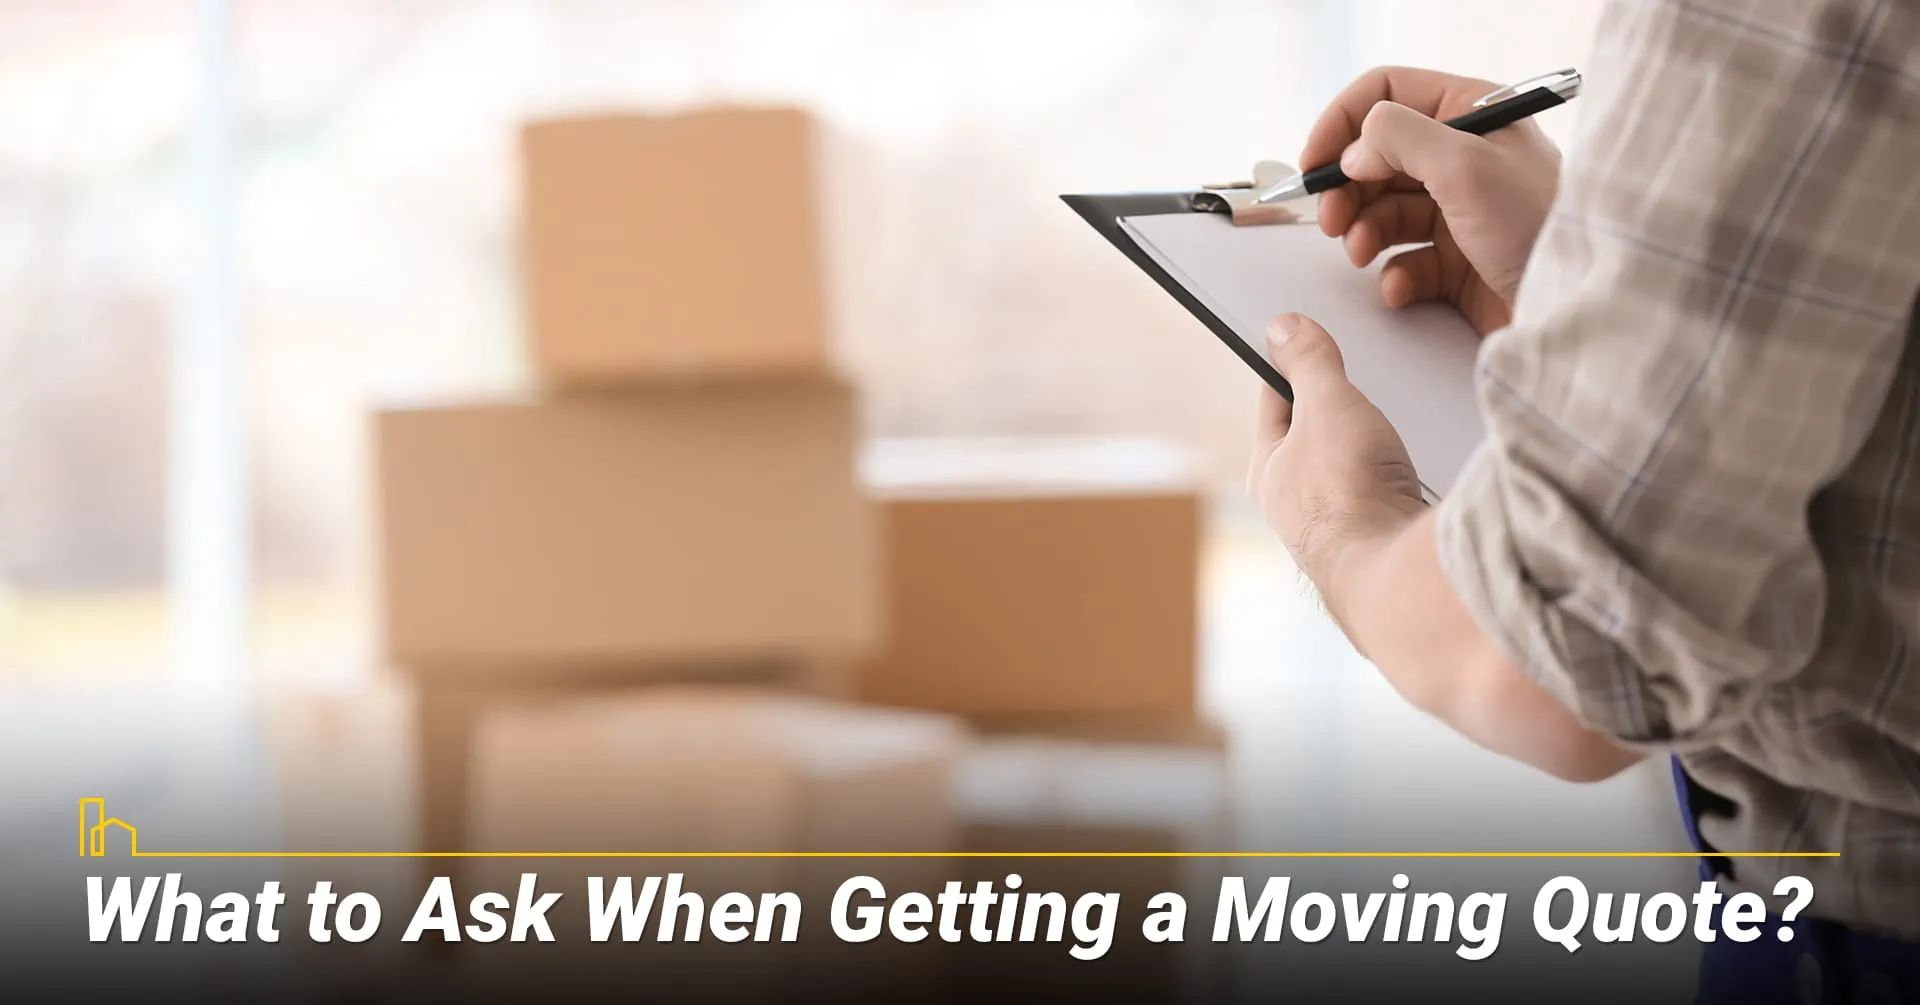 What to Ask When Getting a Moving Quote?